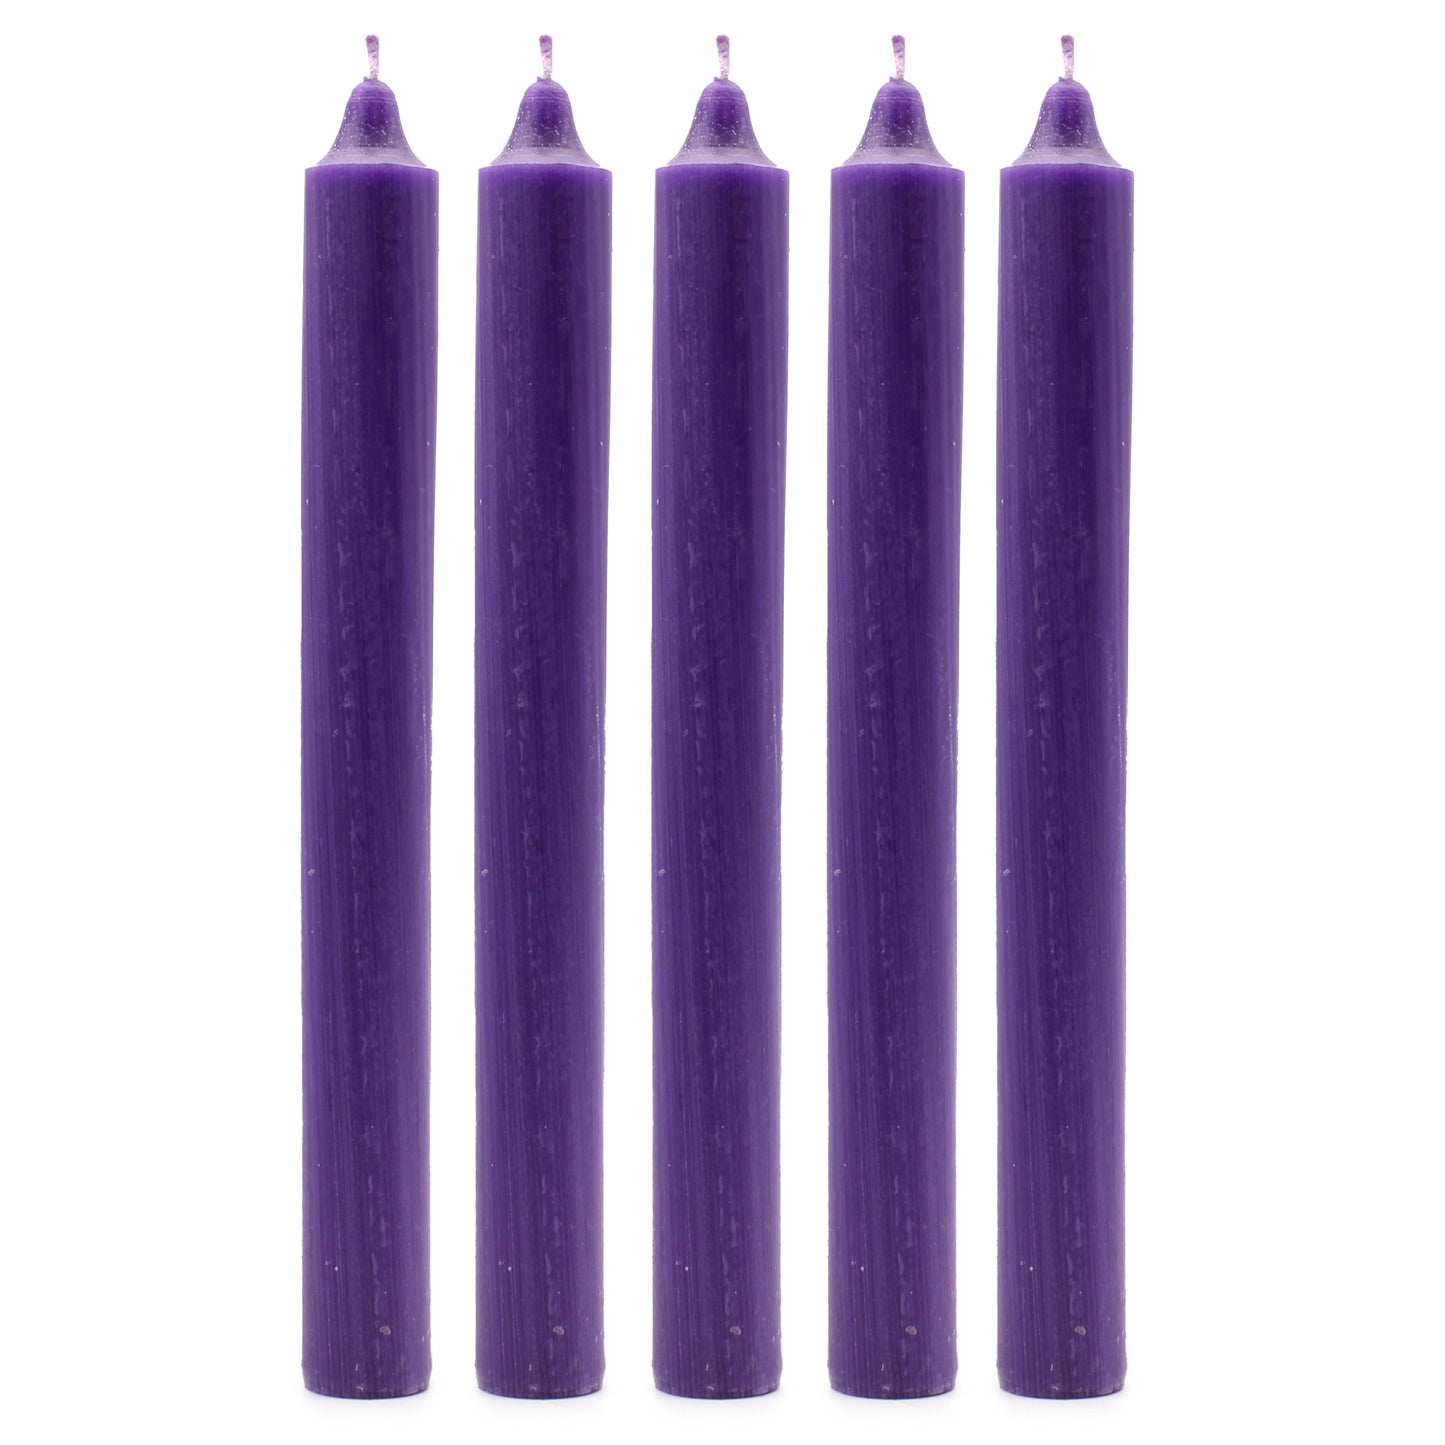 Solid Colour Dinner Candles - Rustic Purple - Pack of 5